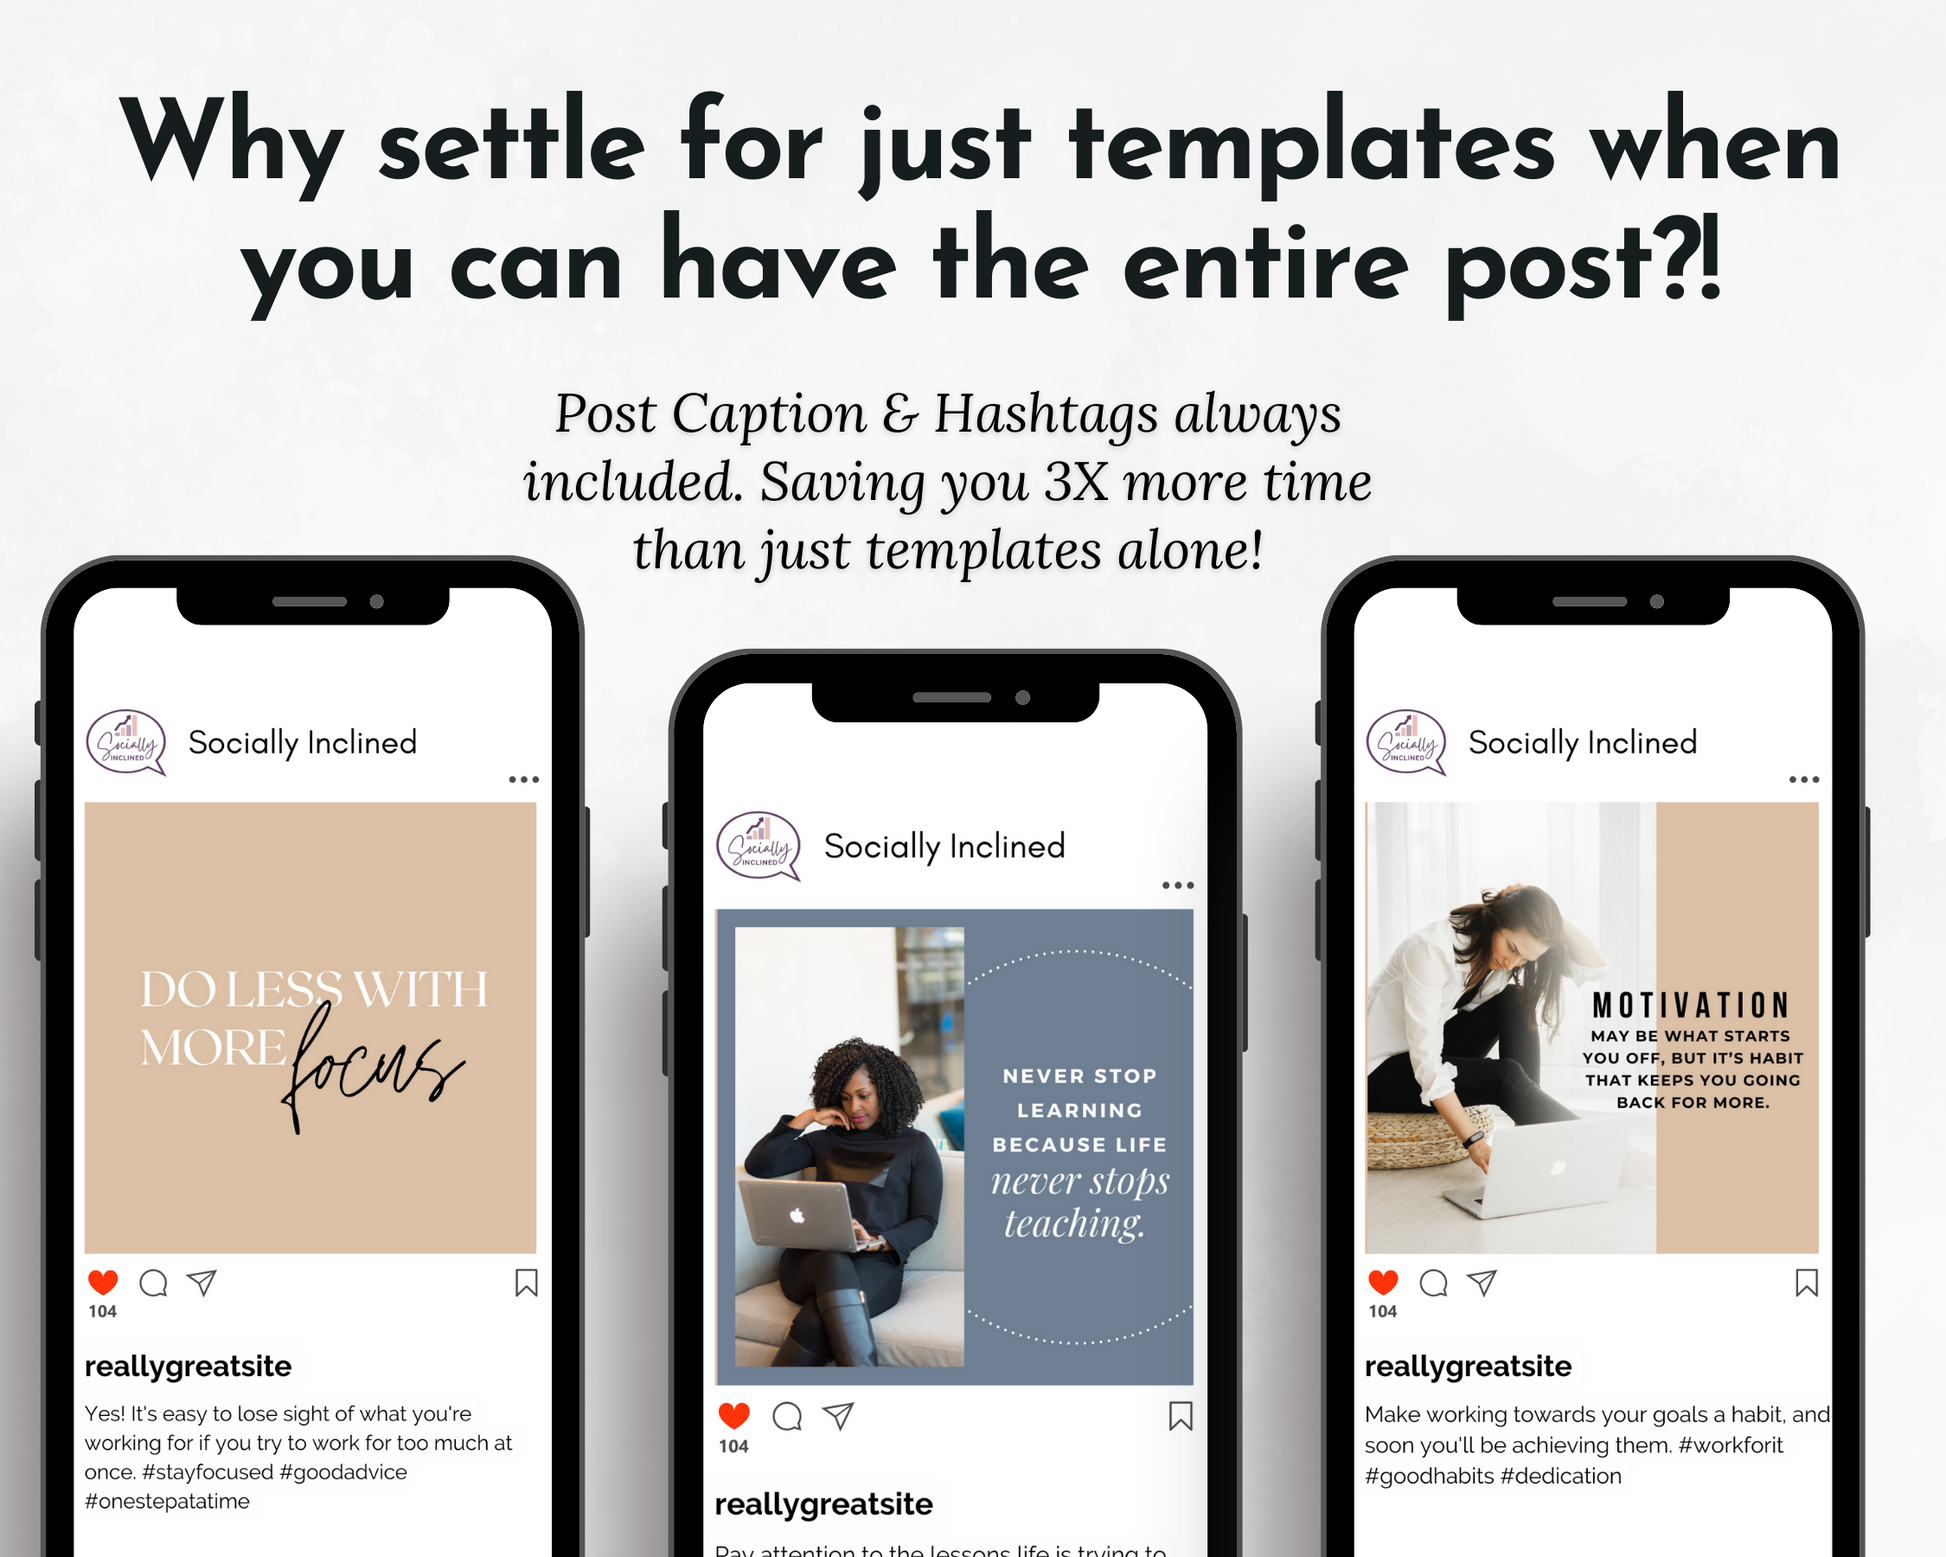 Why settle for just templates when you can have the entire post filled with Socially Inclined's Inspirational Social Media Post Bundle tailored with SEO keywords?